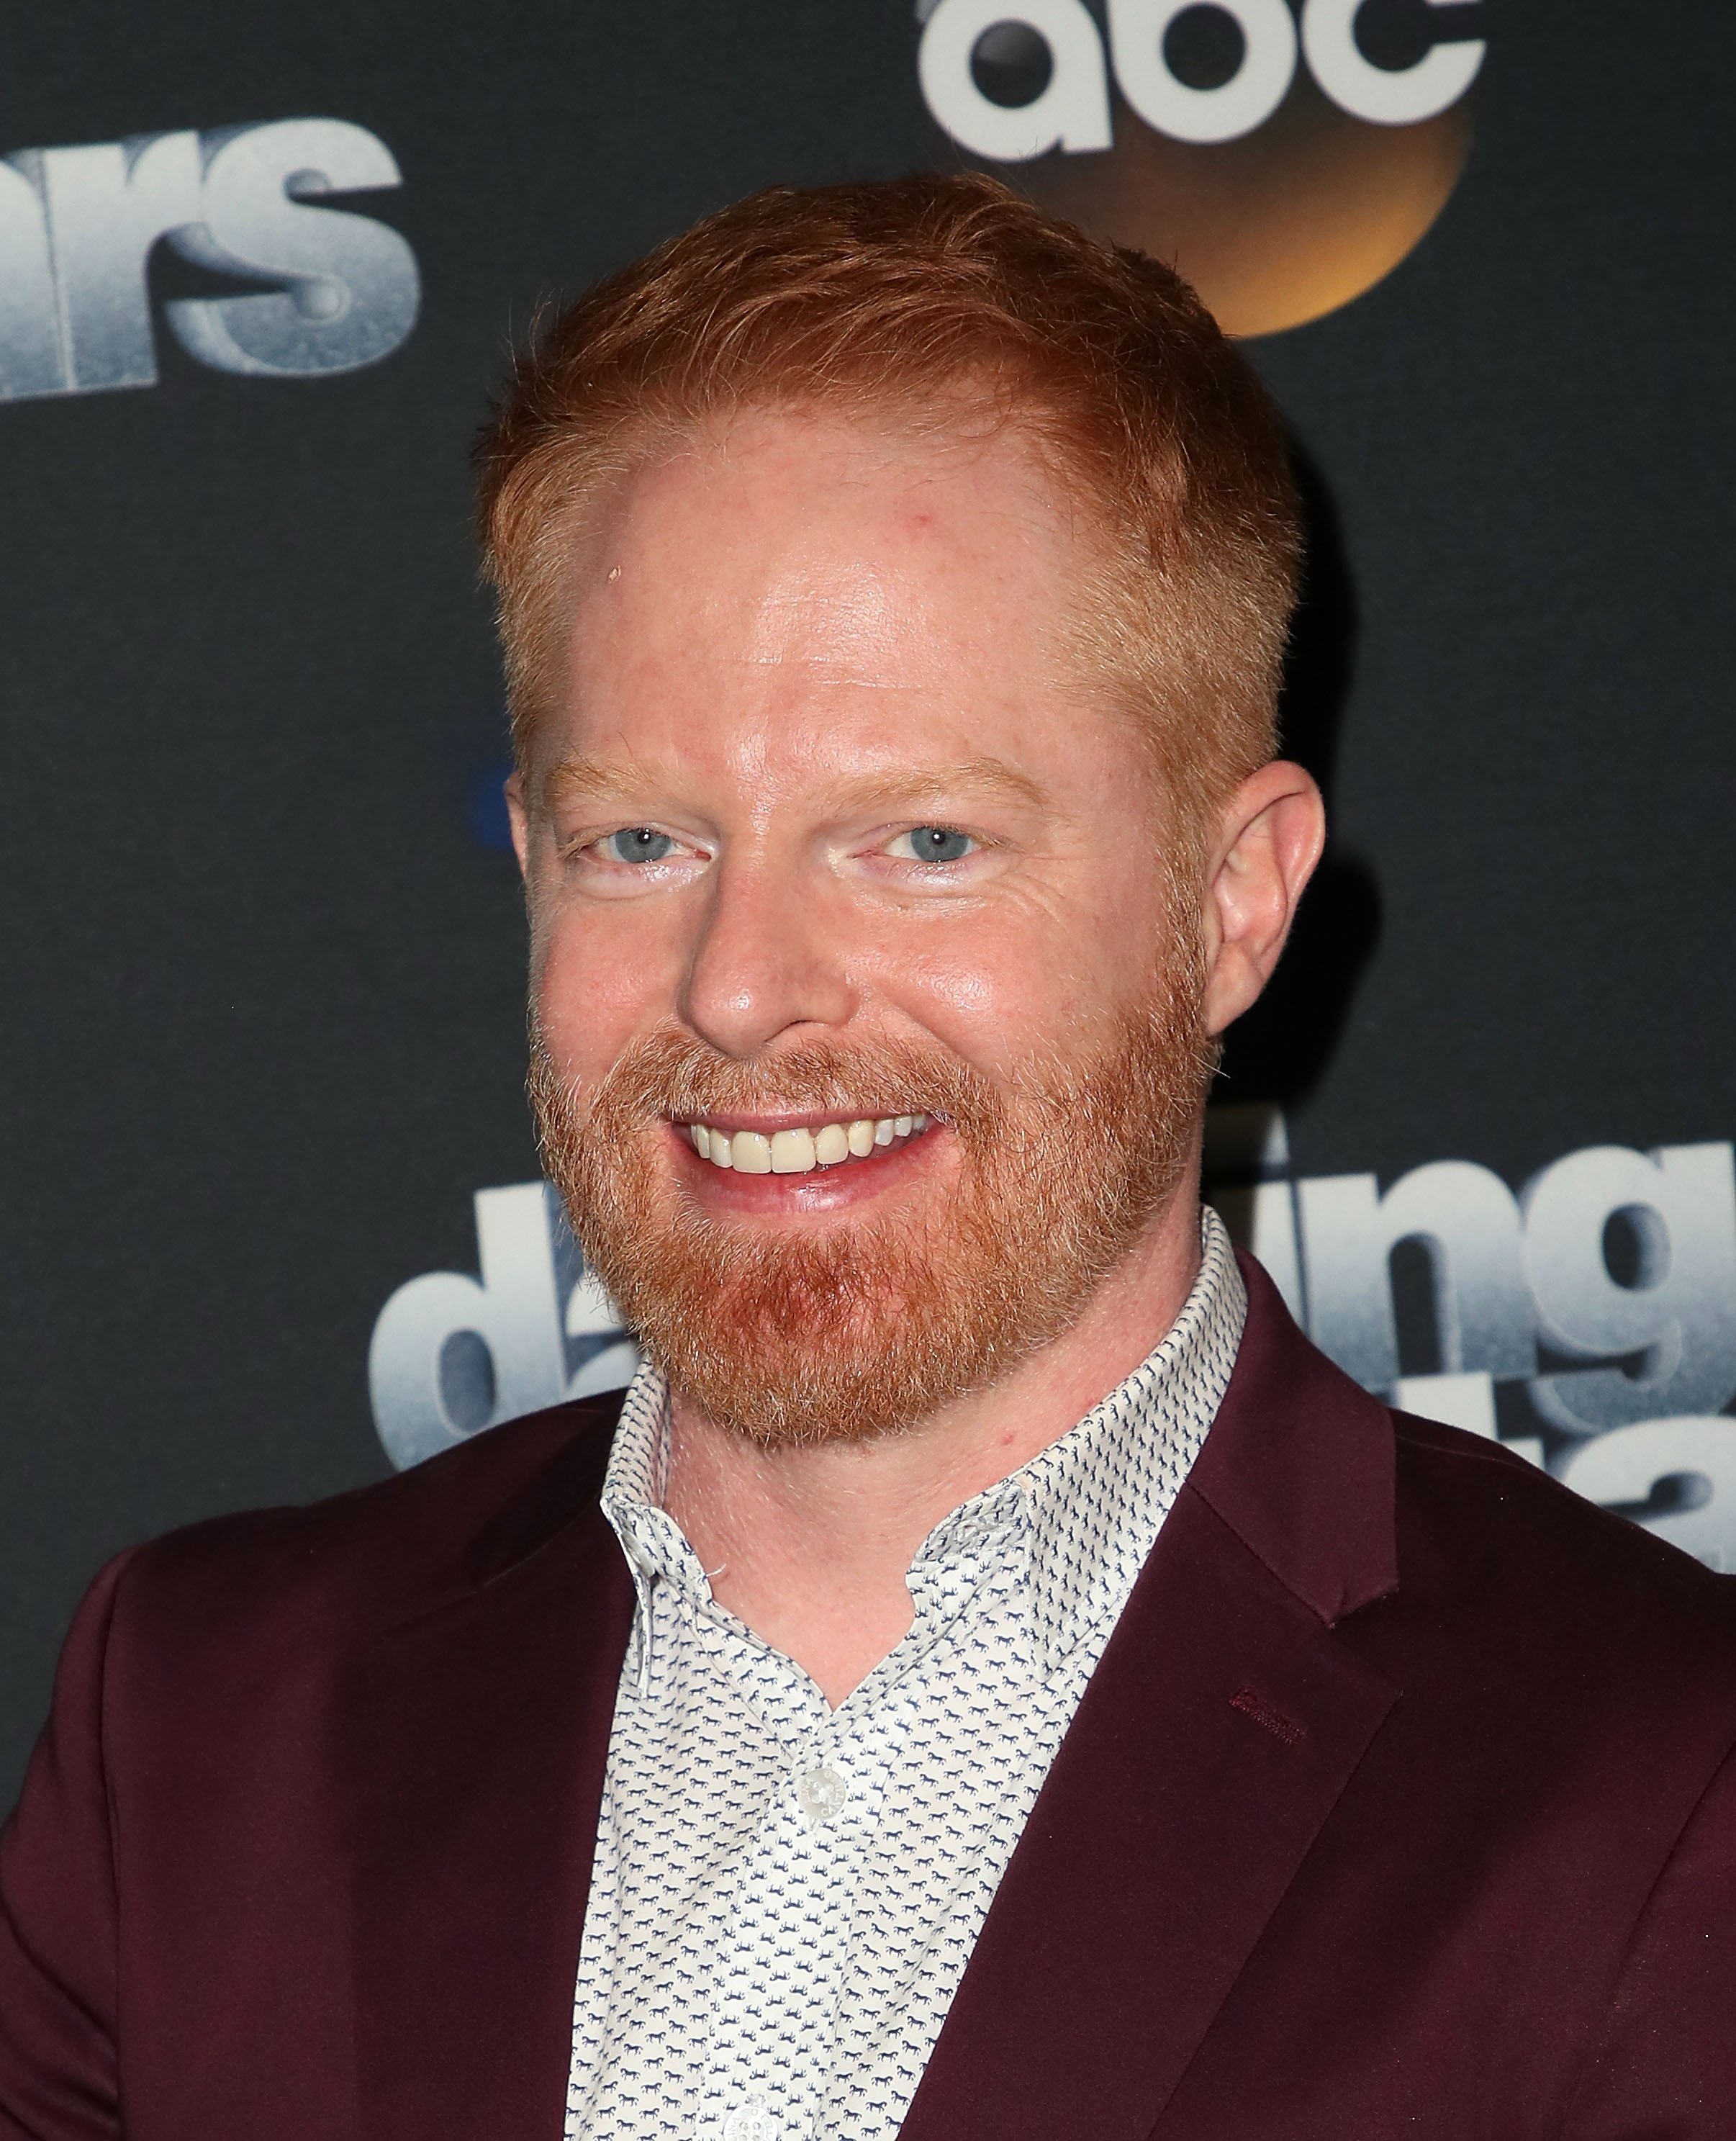 Jesse Tyler Ferguson at "Dancing with the Stars" Season 27 on October 1, 2018, in Los Angeles, California. | Source: Getty Images.